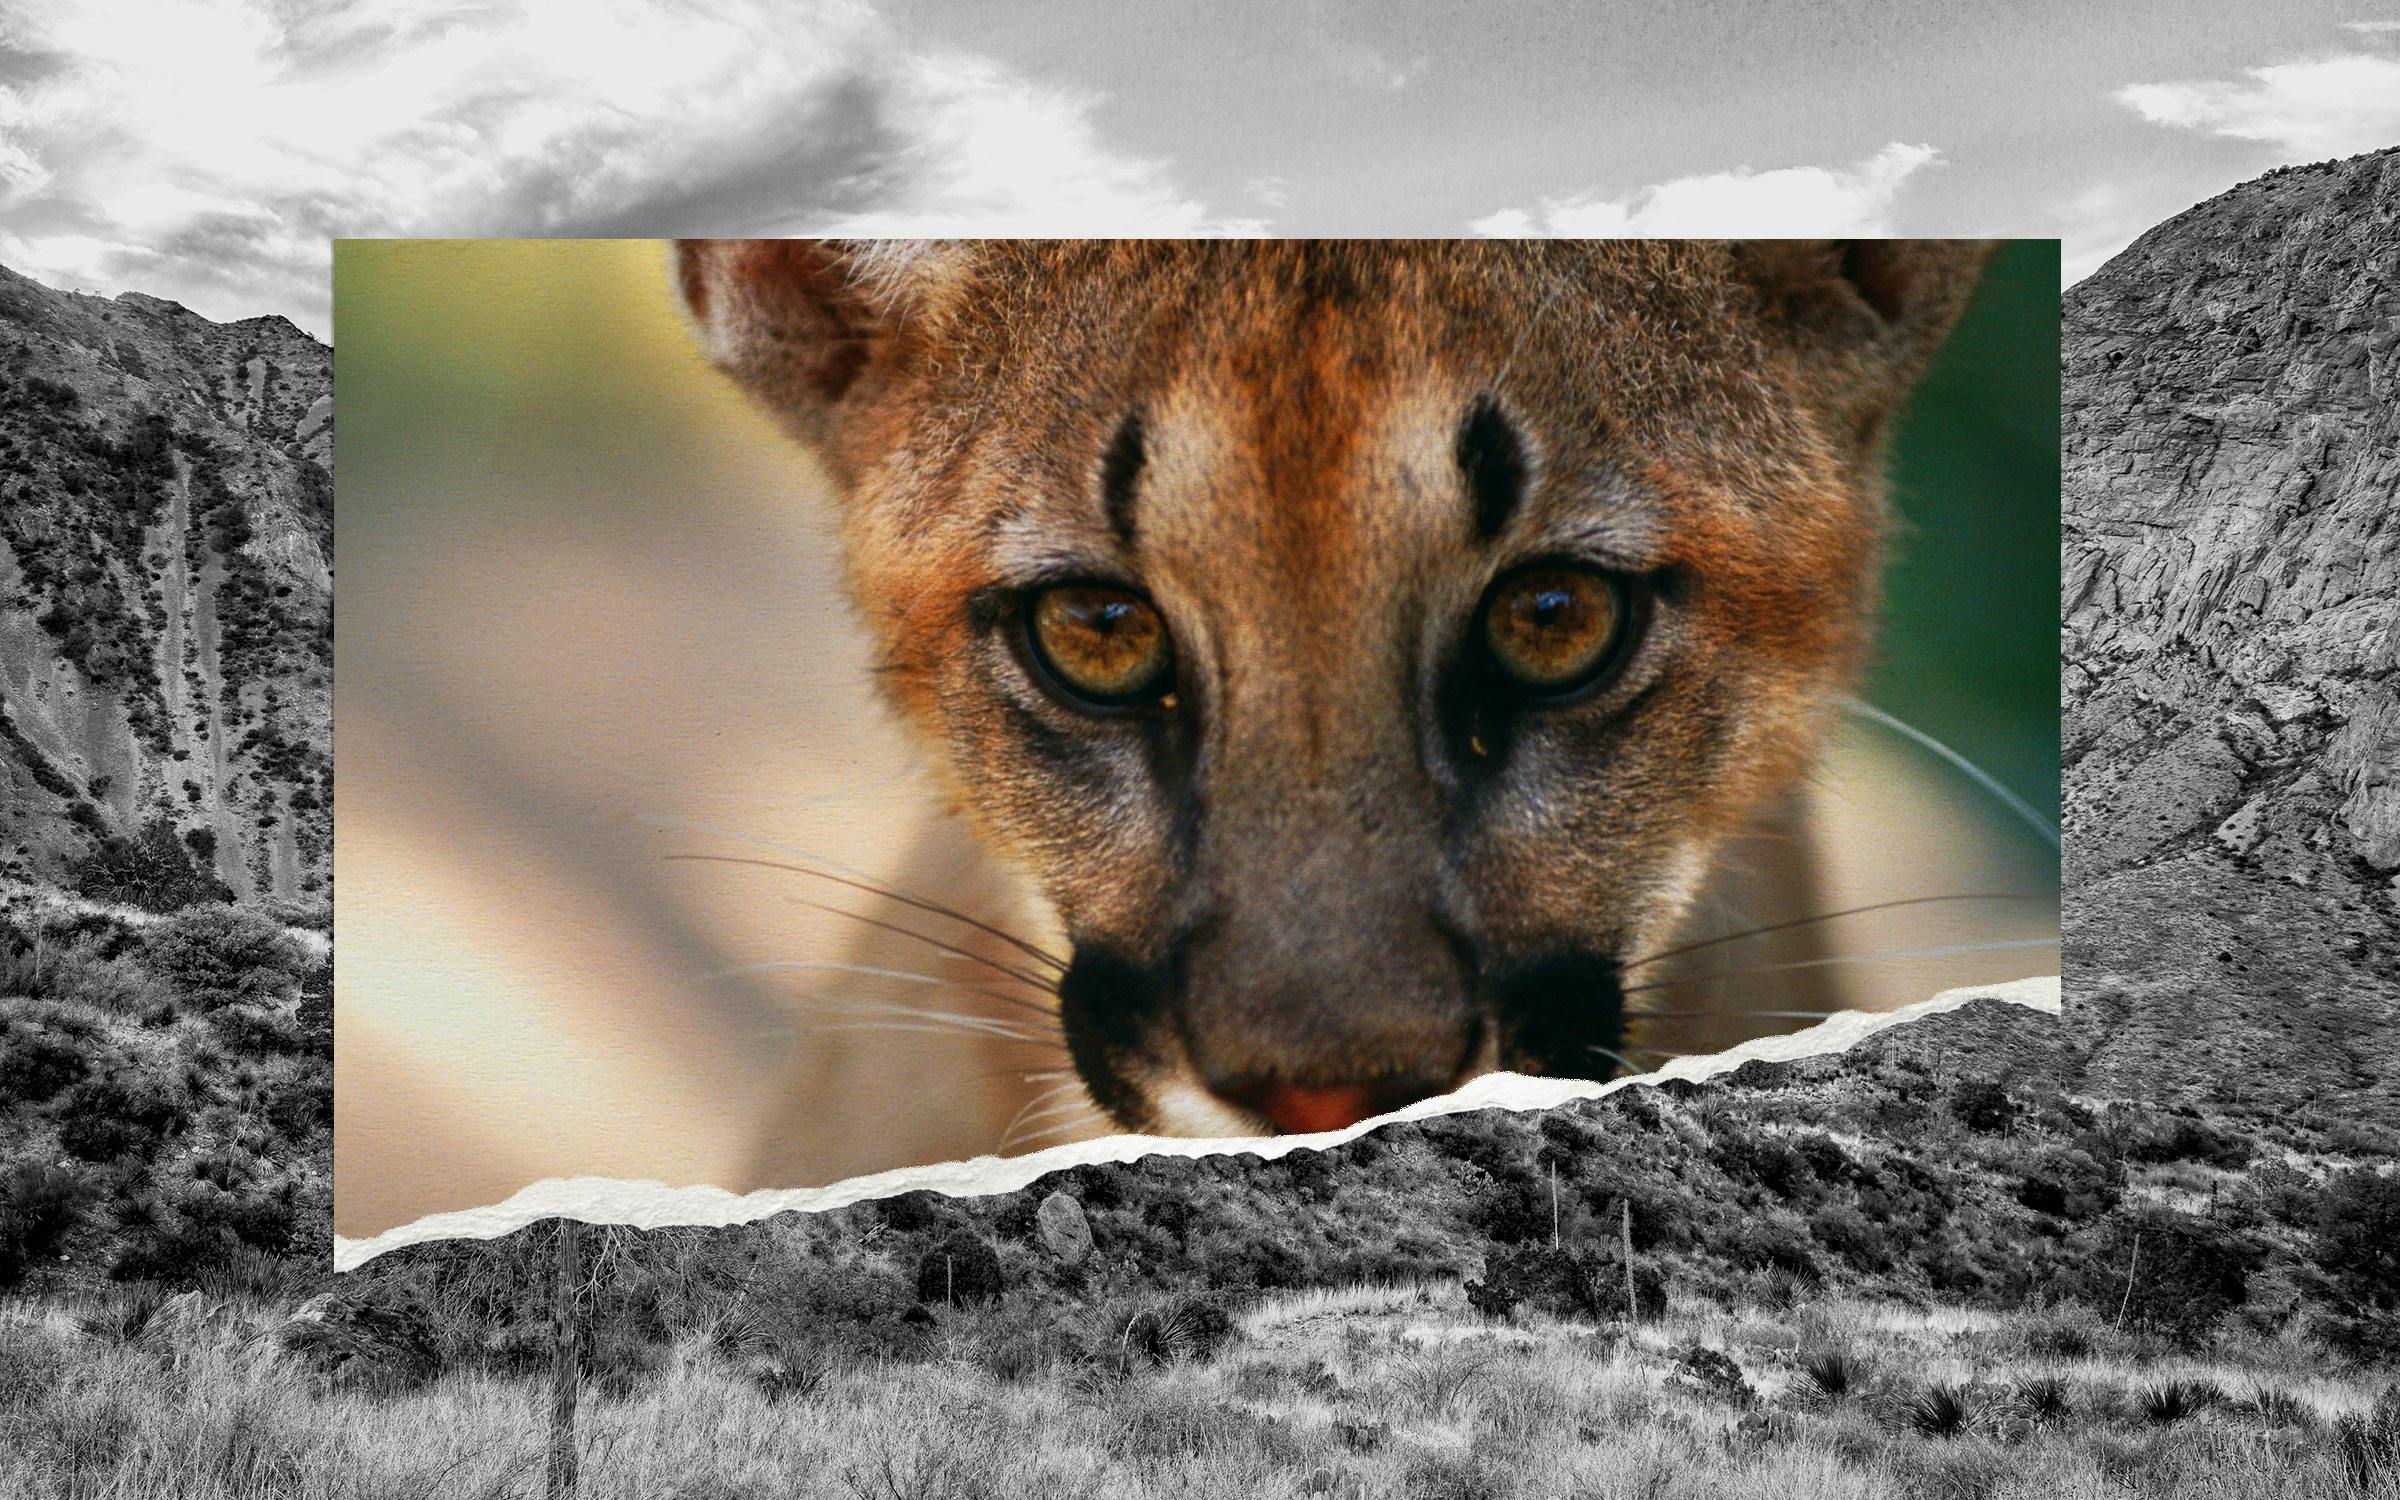 Texas Provides No Protection for Mountain Lions. Should That Change?